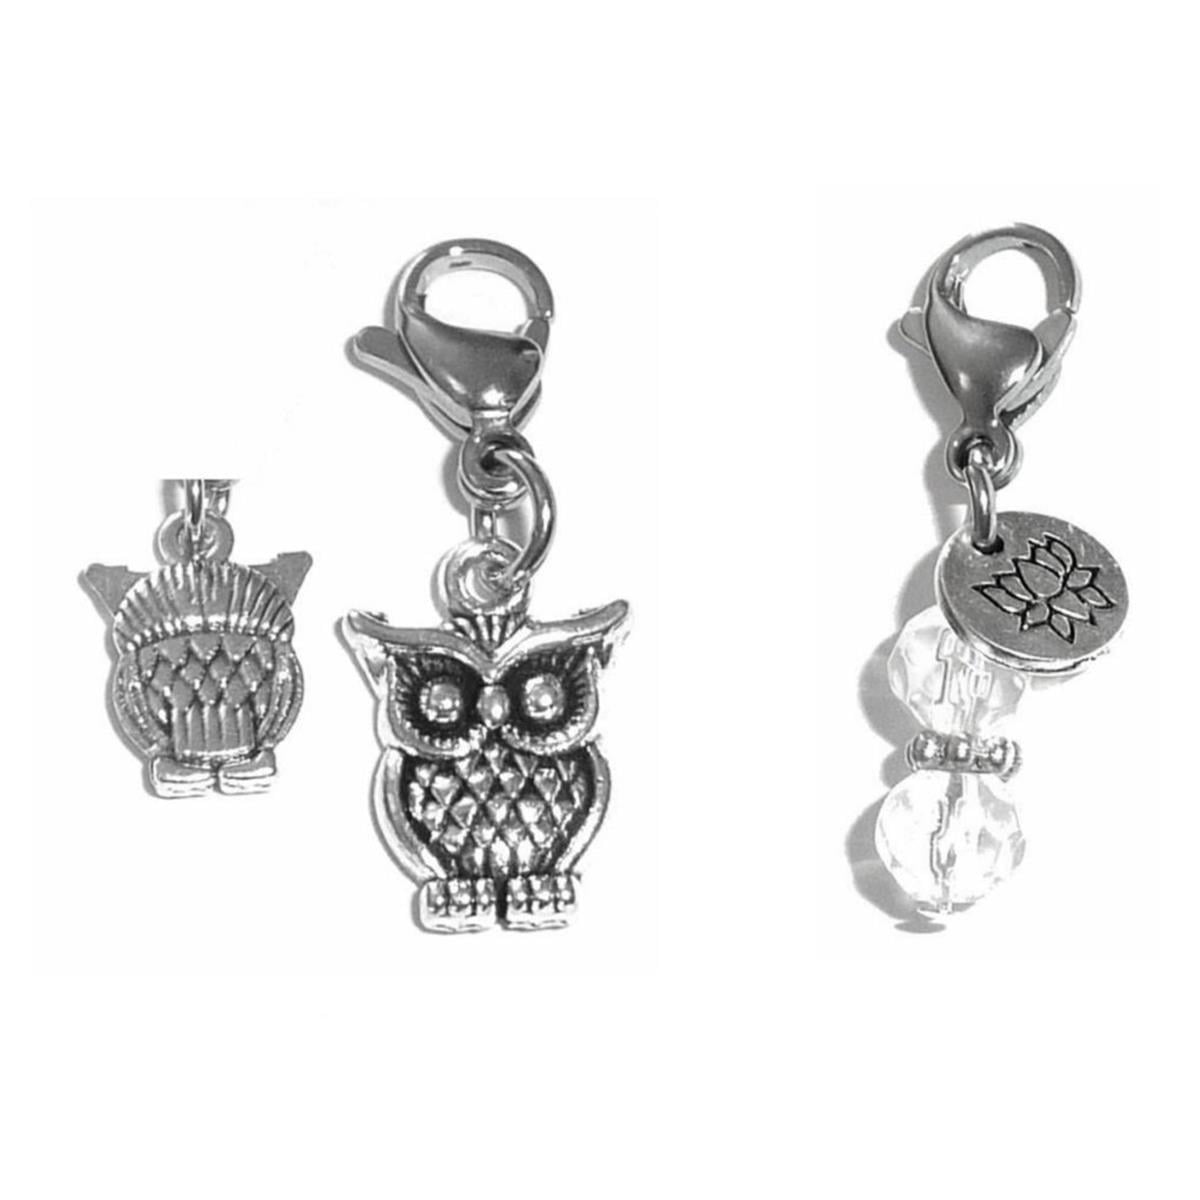 Animal Charms Clip On To Anything – Perfect For Charm Bracelets And  Necklaces, Bag Or Purse Charms, Backpacks, Zipper Pulls - Dog Charm 